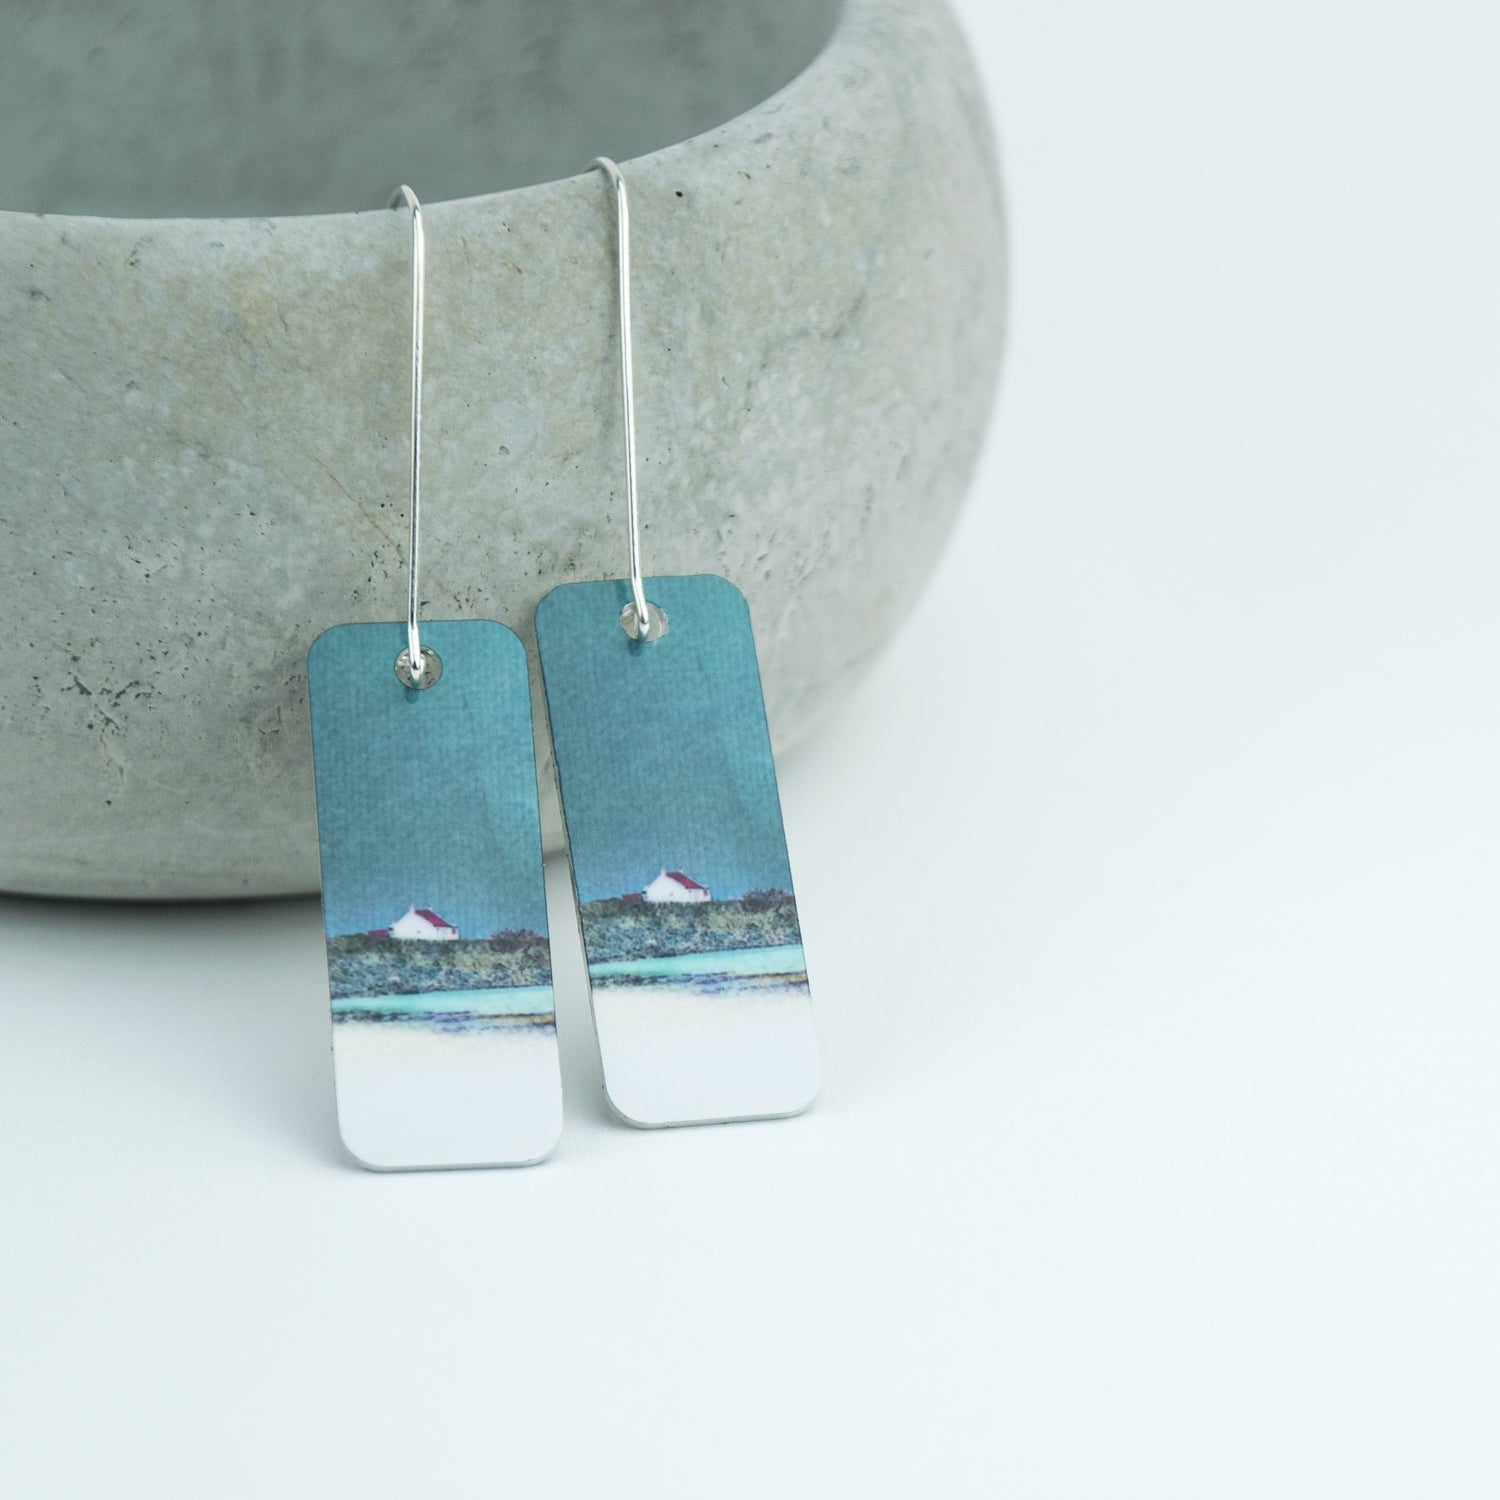 Barra Earrings in Silver and Aluminum | Cath Waters | Scottish Creations